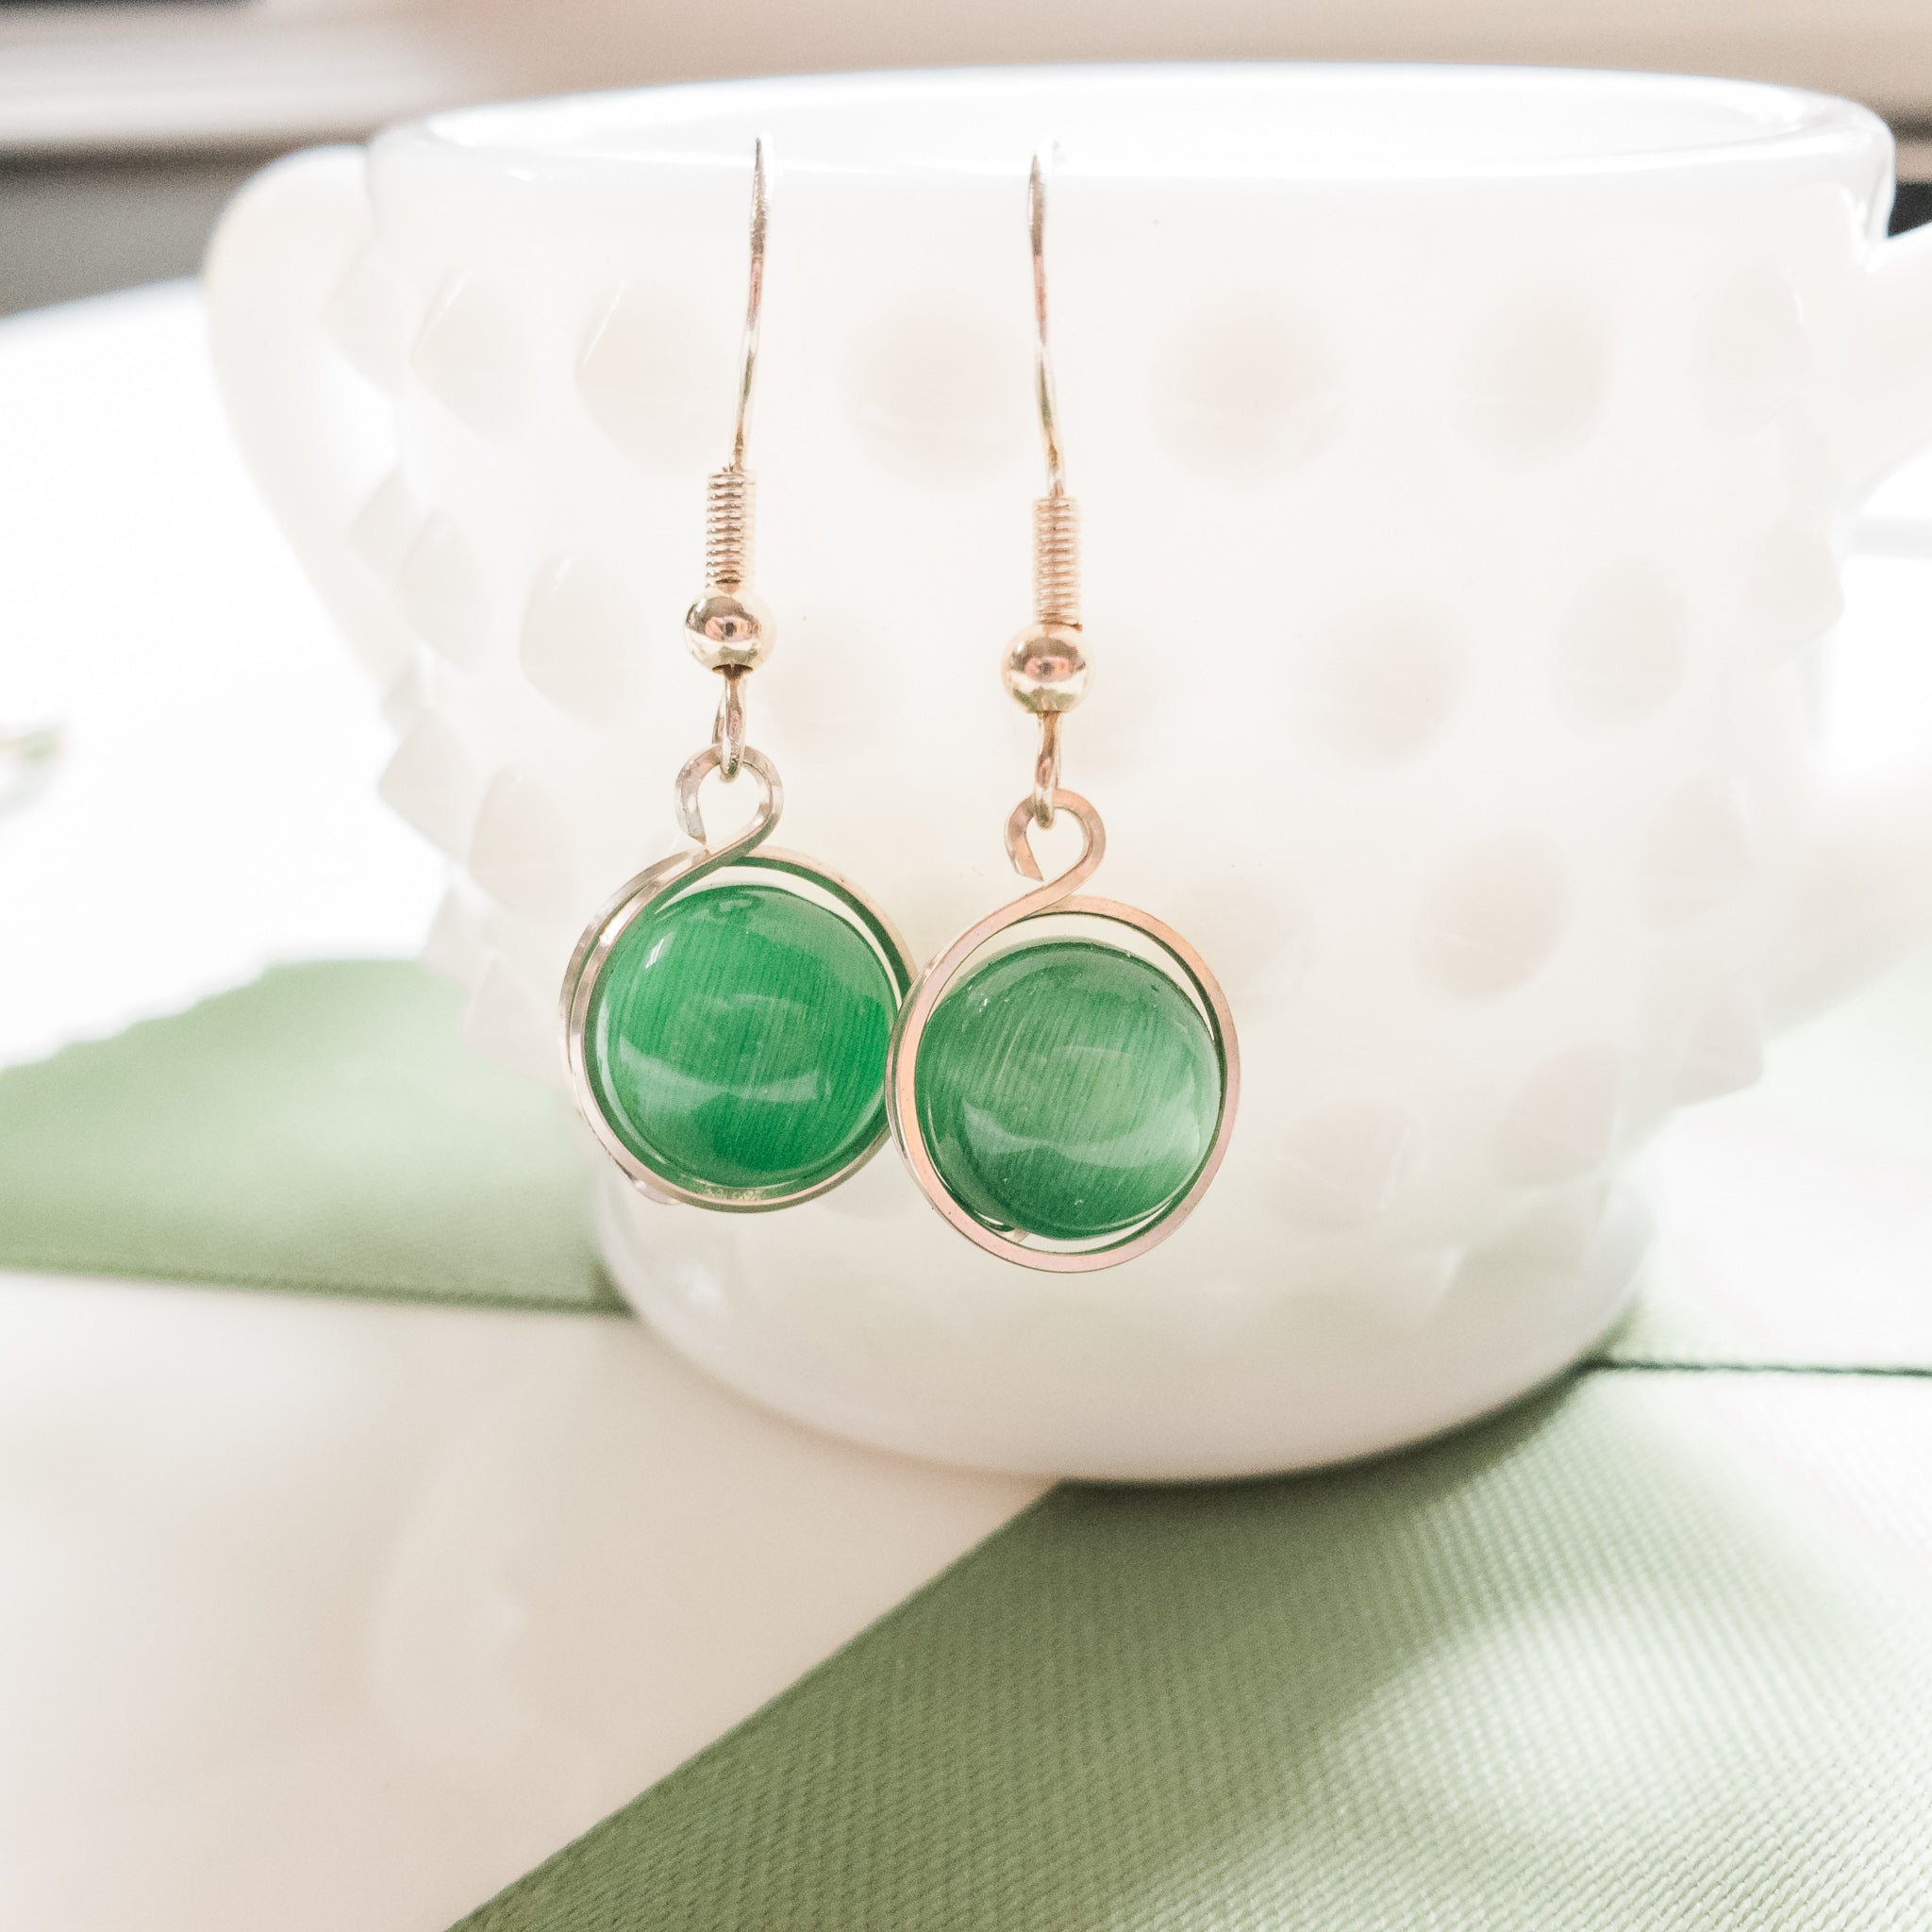 Green Cats Eye Earrings Wrapped in Sterling Silver - Close-up view - BellaChel Jeweler